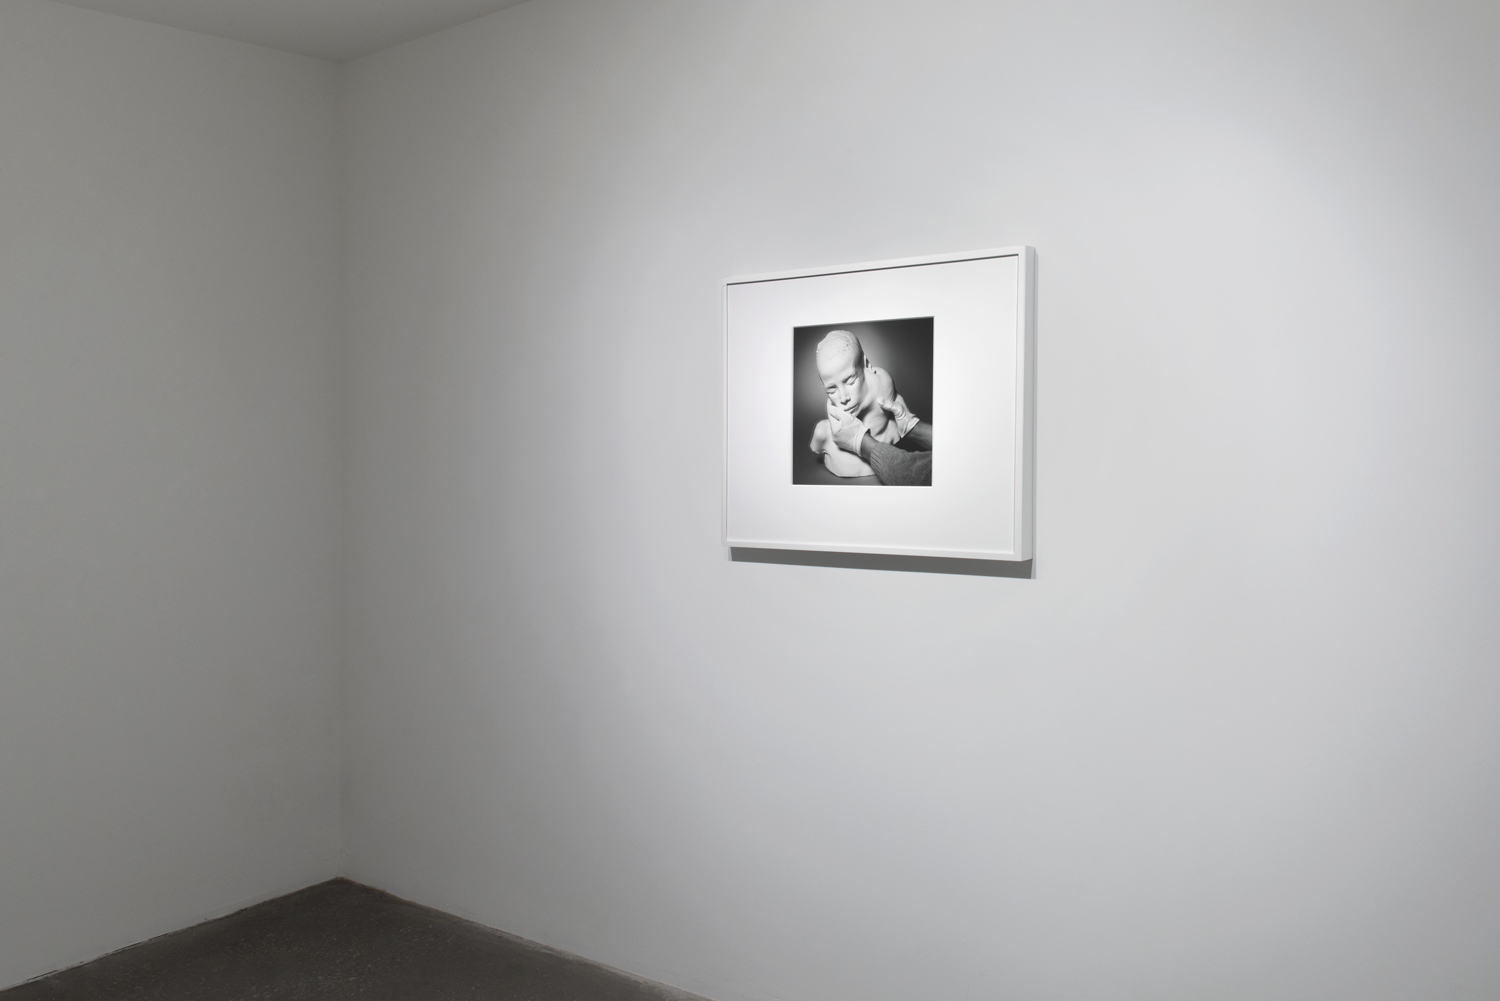   Lifecast &nbsp;(2017) gelatin silver print, 13.5” x 15”  Installation view of  Unruly Matter  at Daniel Faria Gallery, Toronto, Canada 